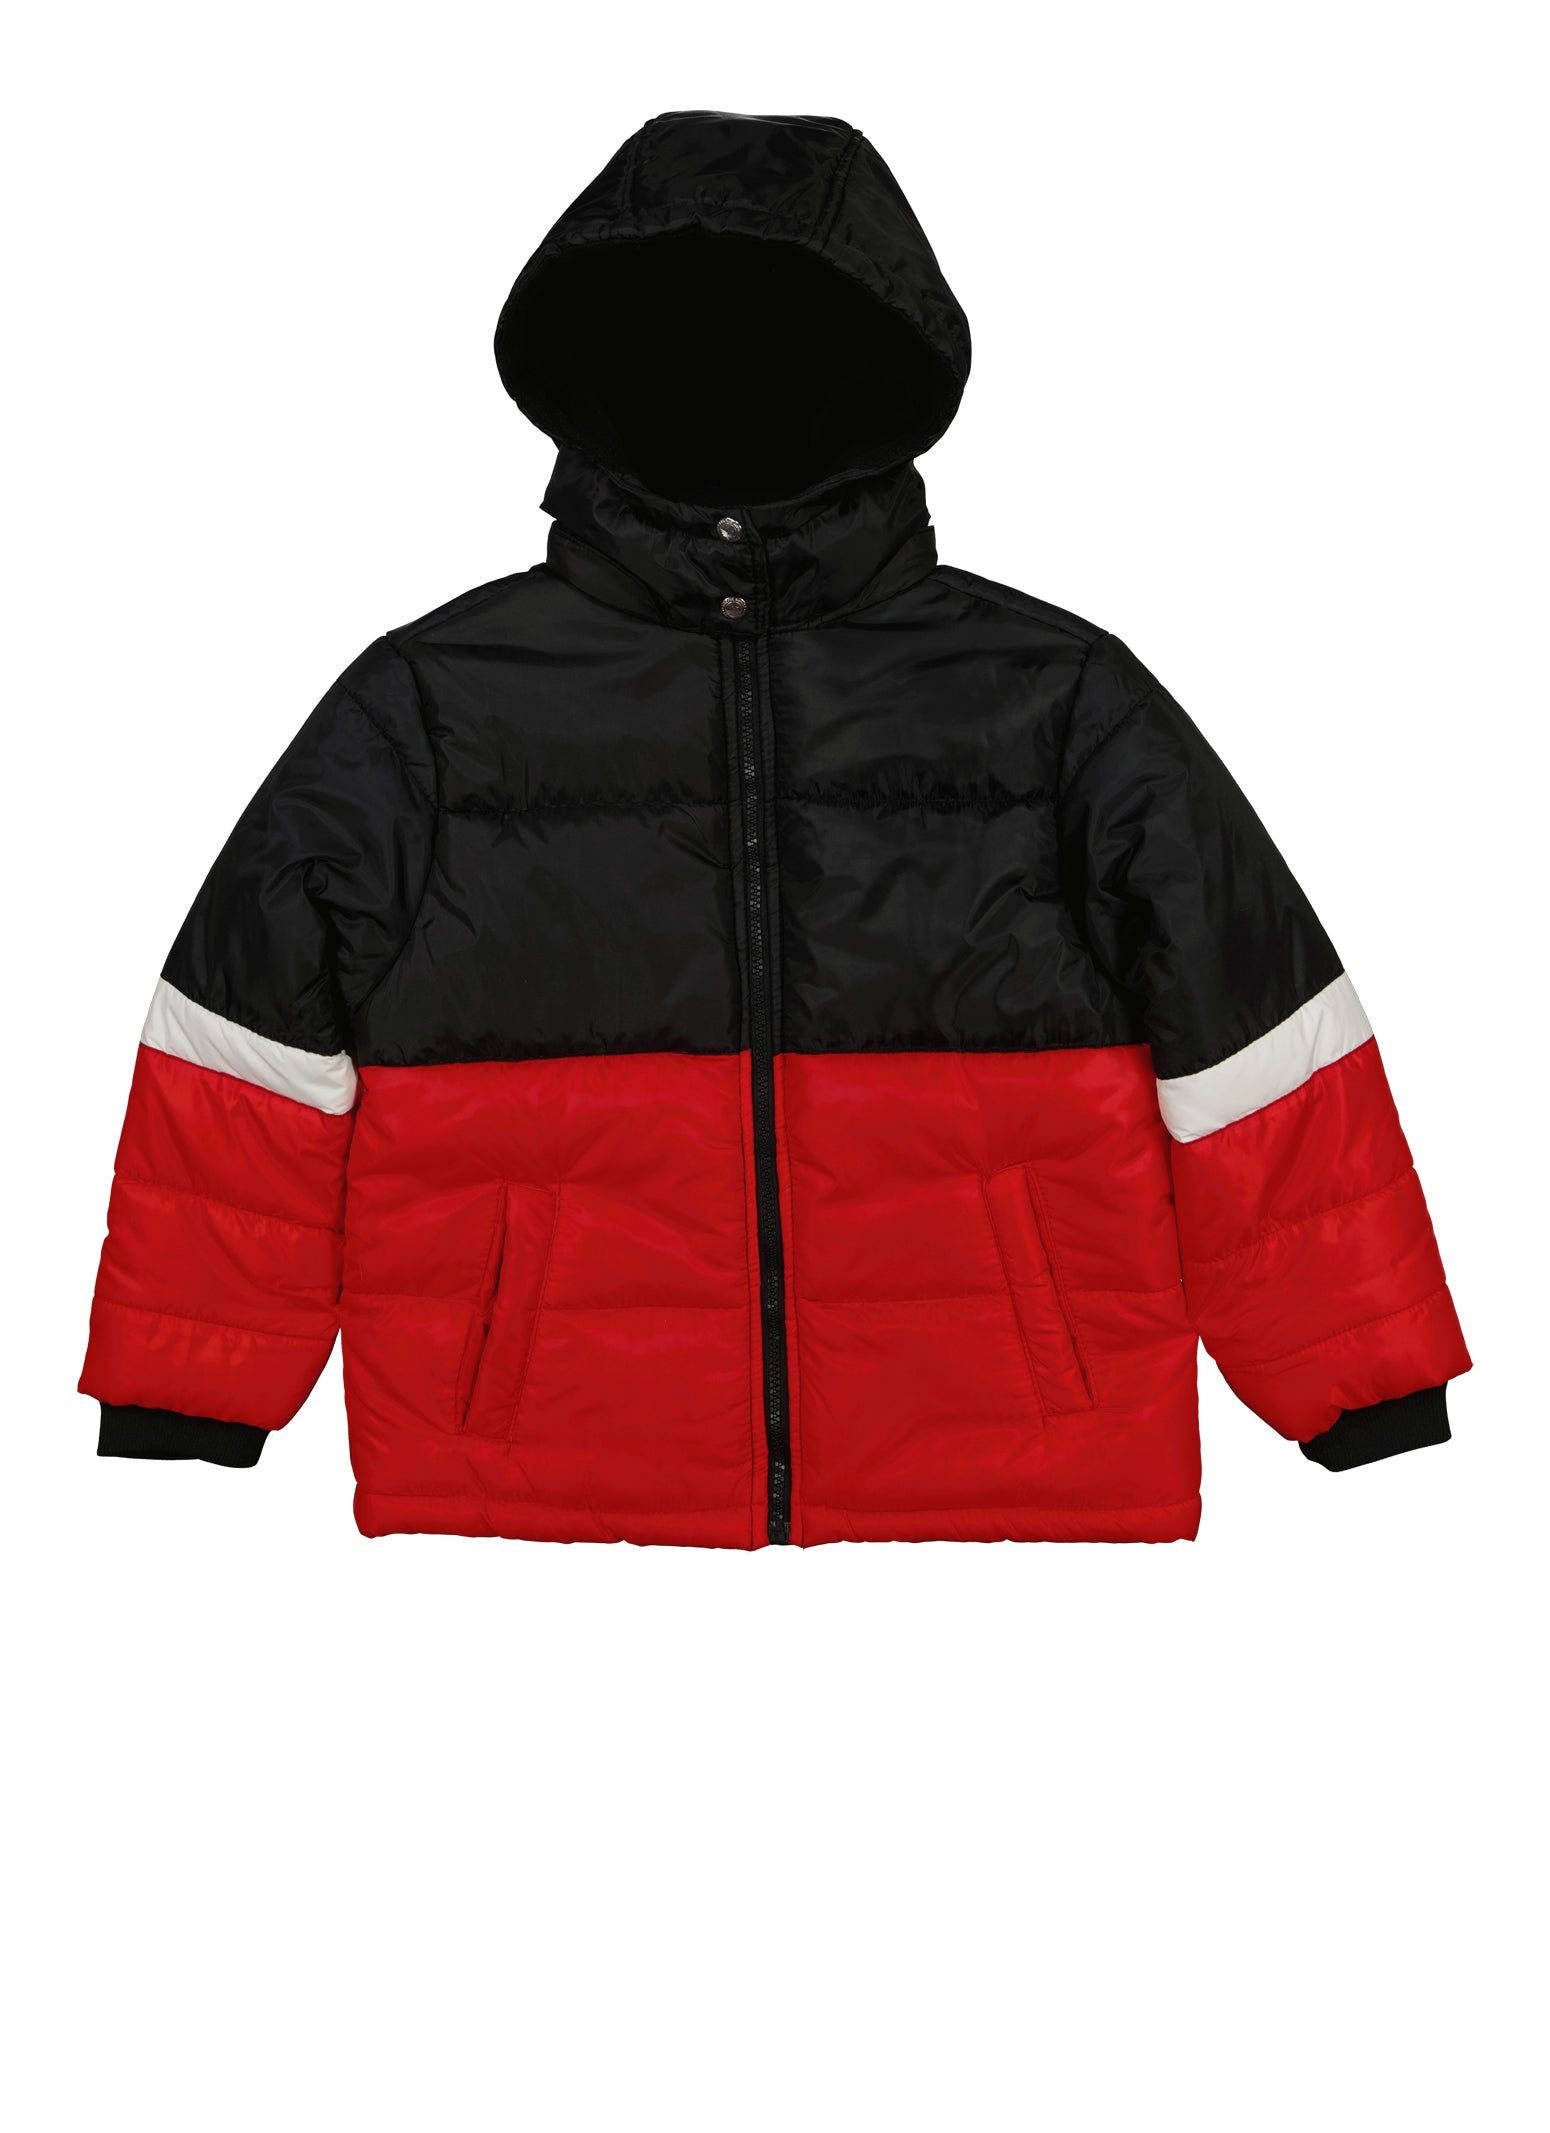 Boys Color Blocked Zip Front Puffer Jacket, Multi, Size 16-18